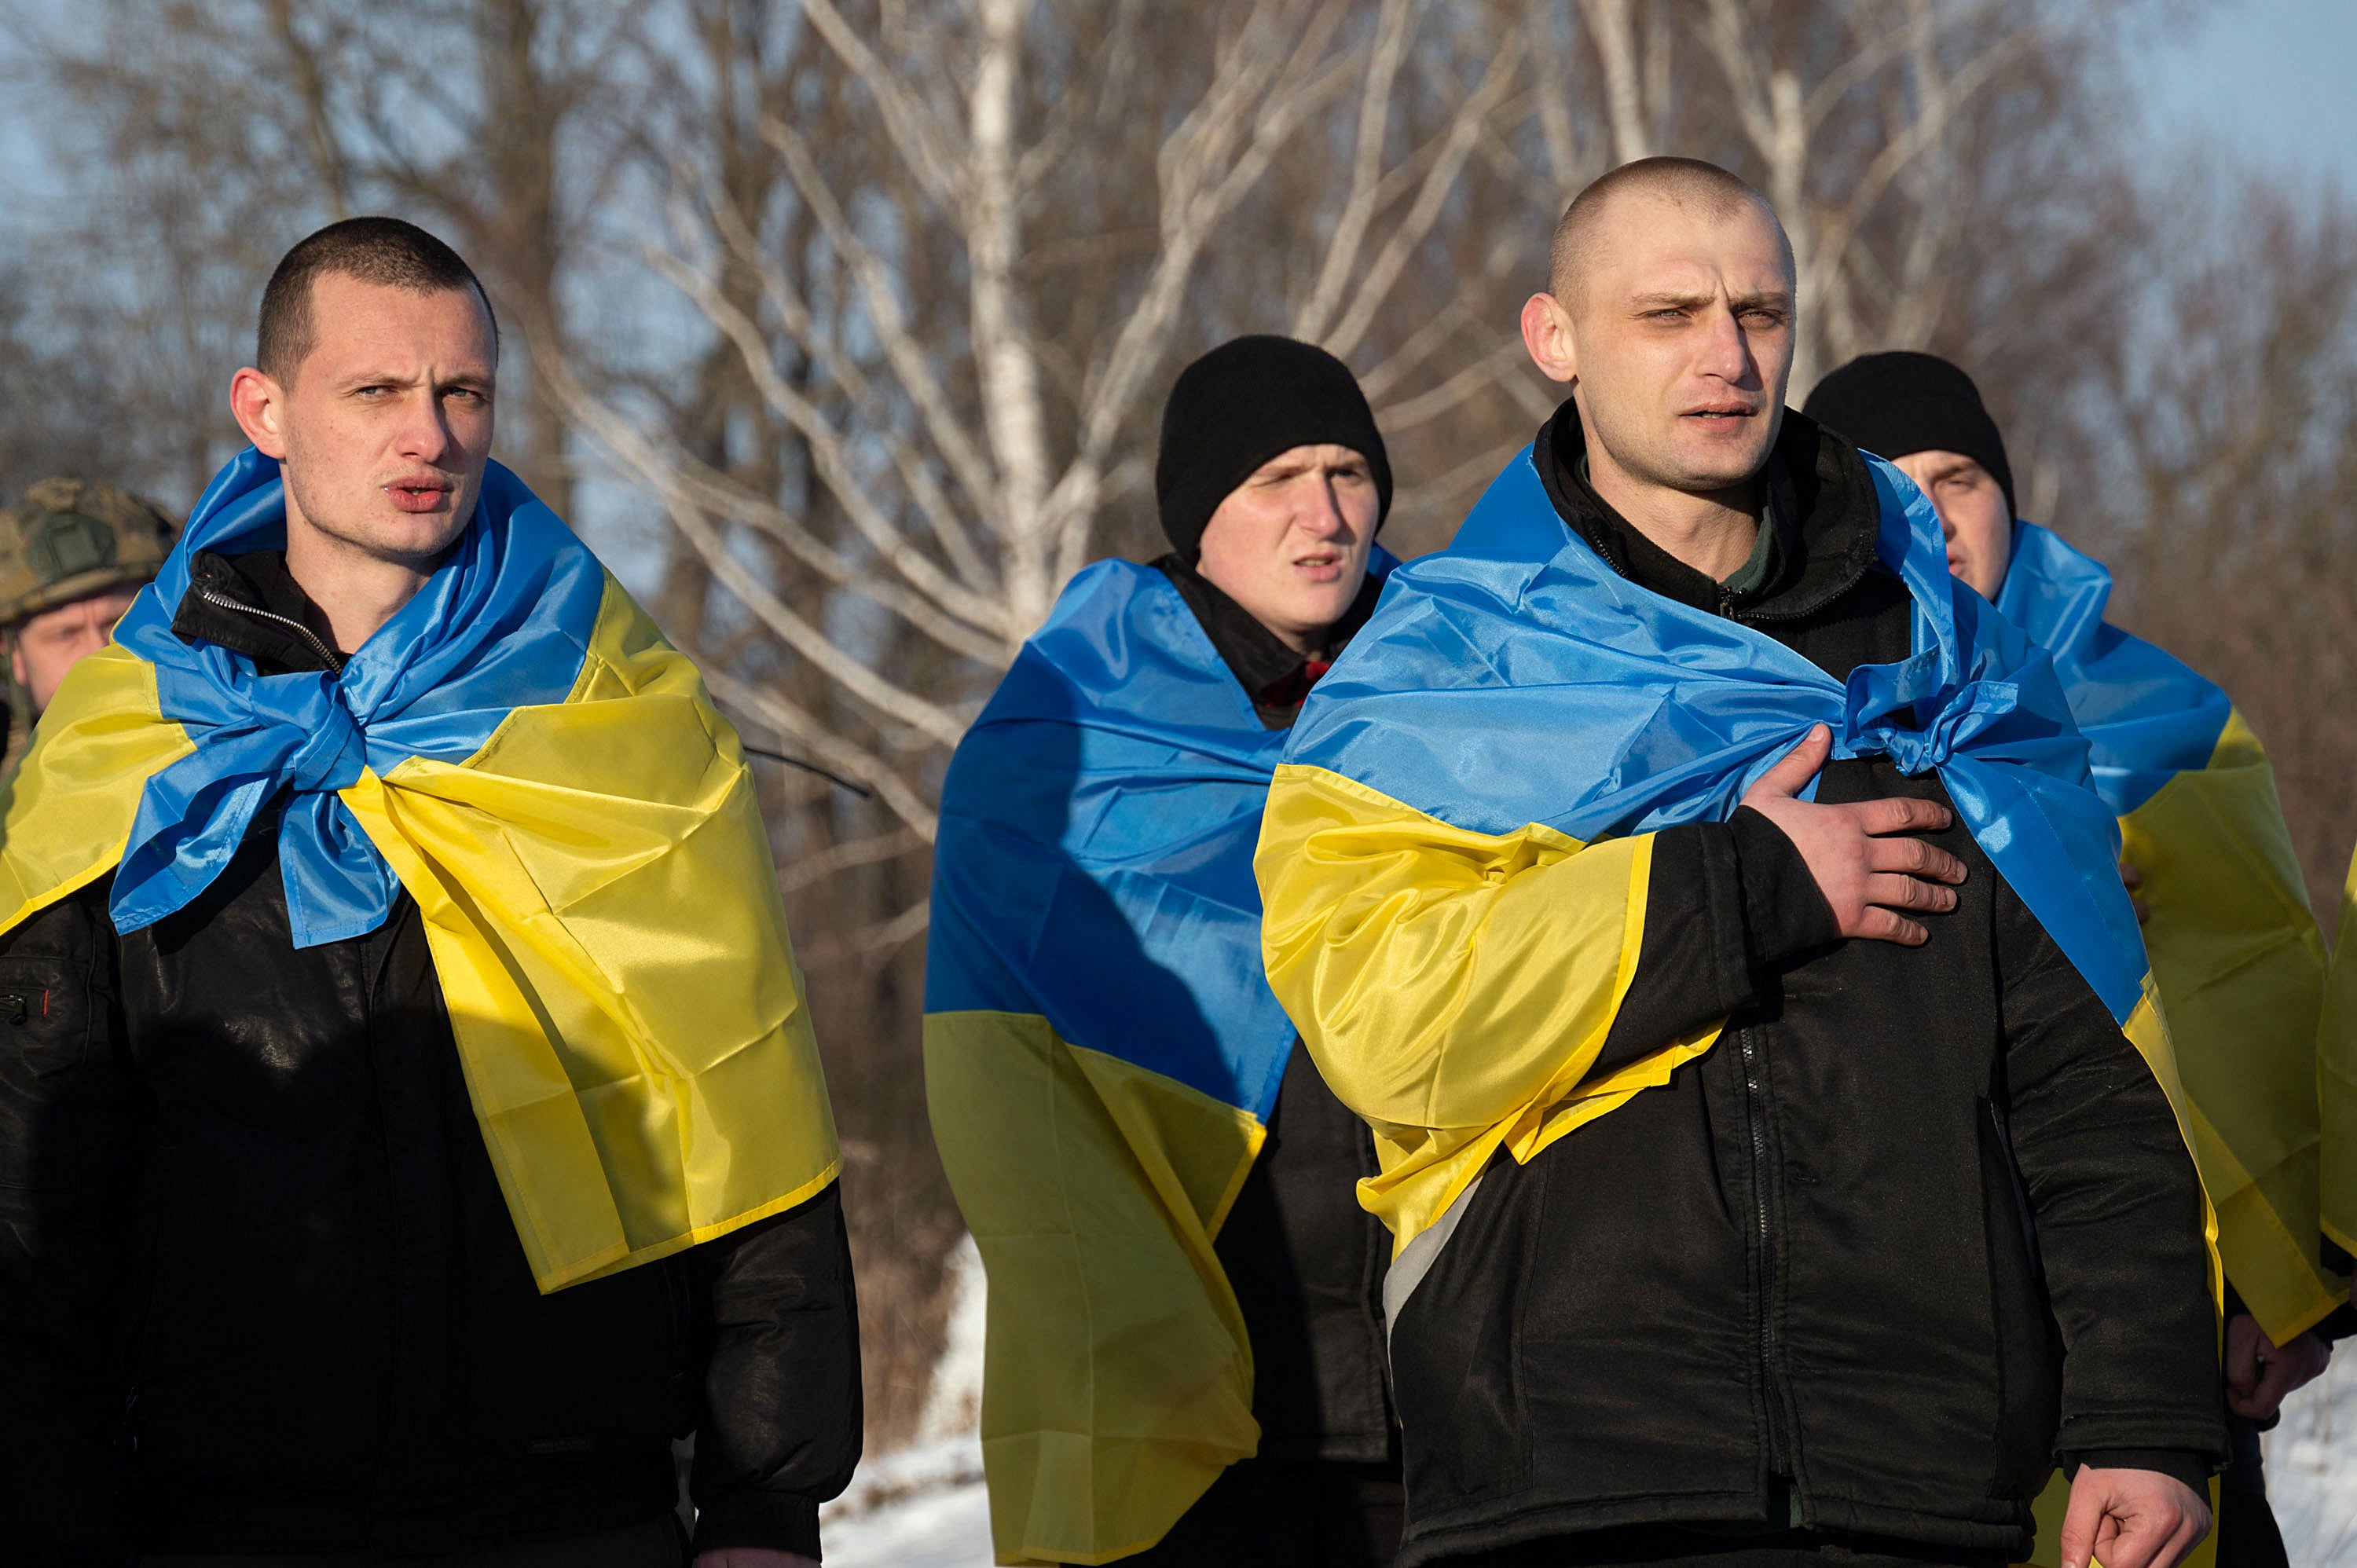 Ukrainian former prisoners of war wrapped in a Ukrainian flag and singing their national anthem, following a prisoner exchange